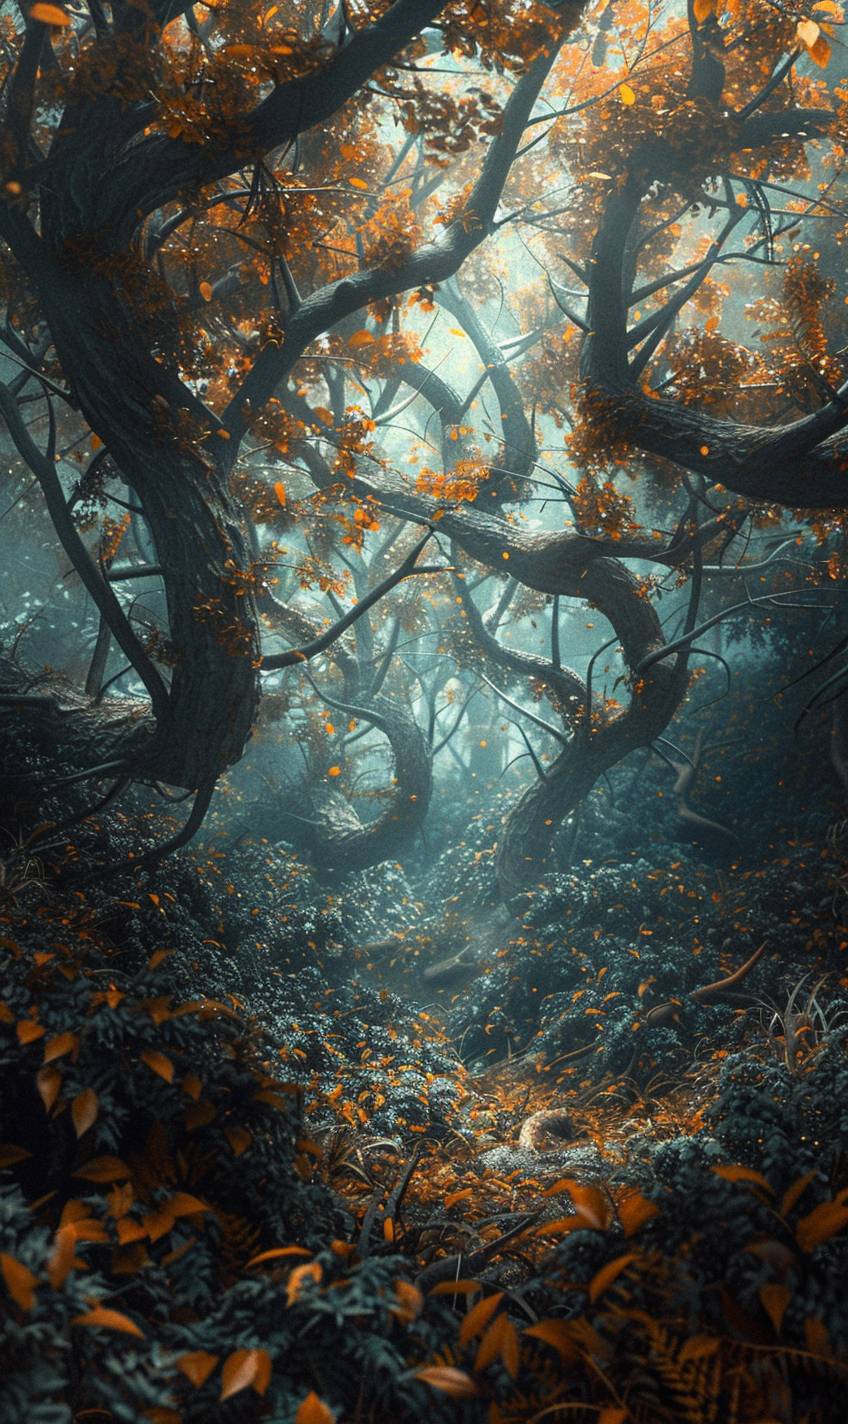 In style of Filip Hodas, Whispering winds in a mystical forest